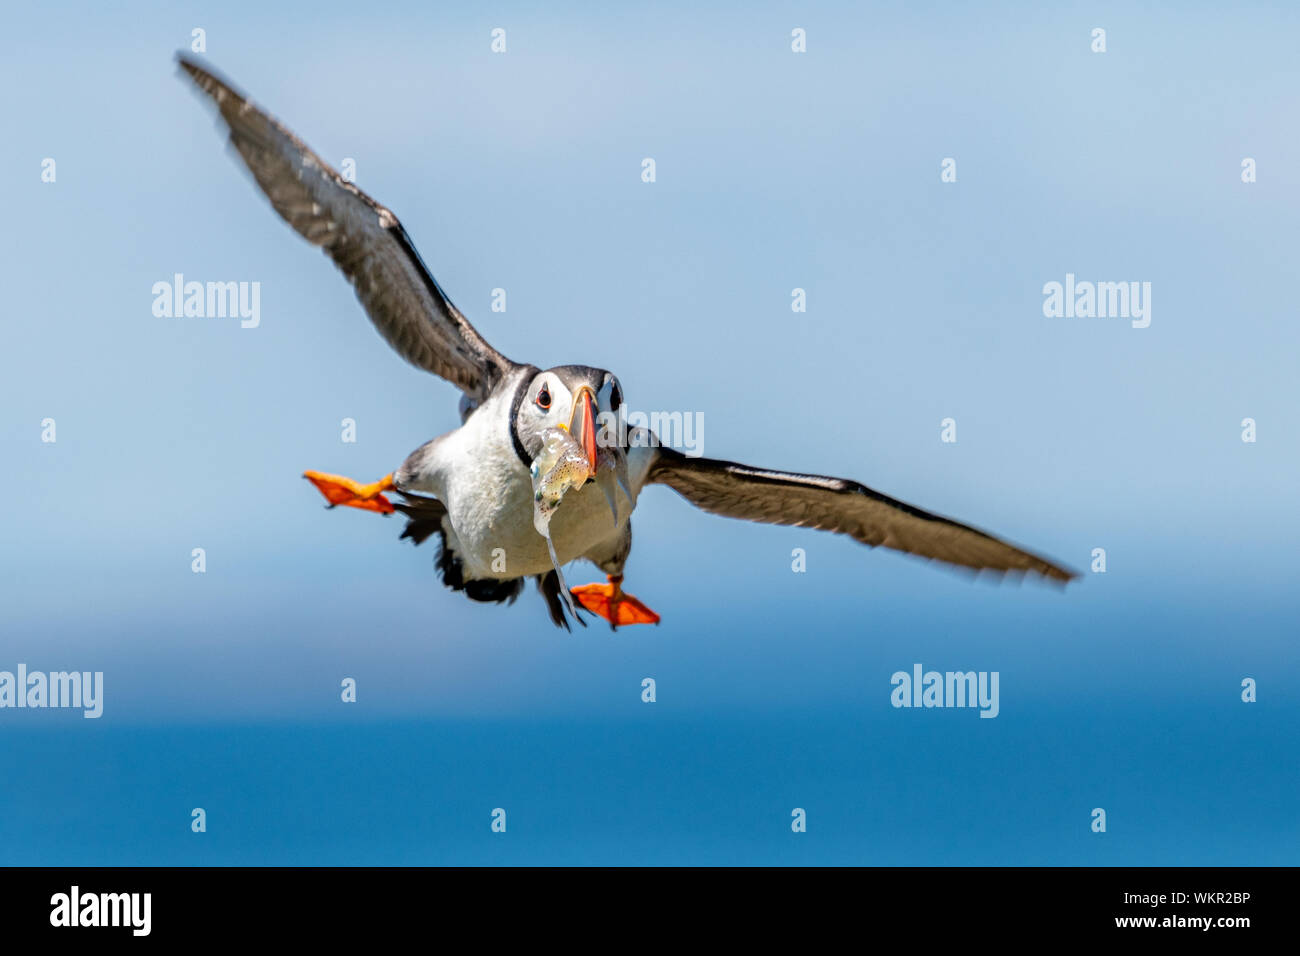 Puffin (Fratercula arctica), Flying with Fish Stock Photo